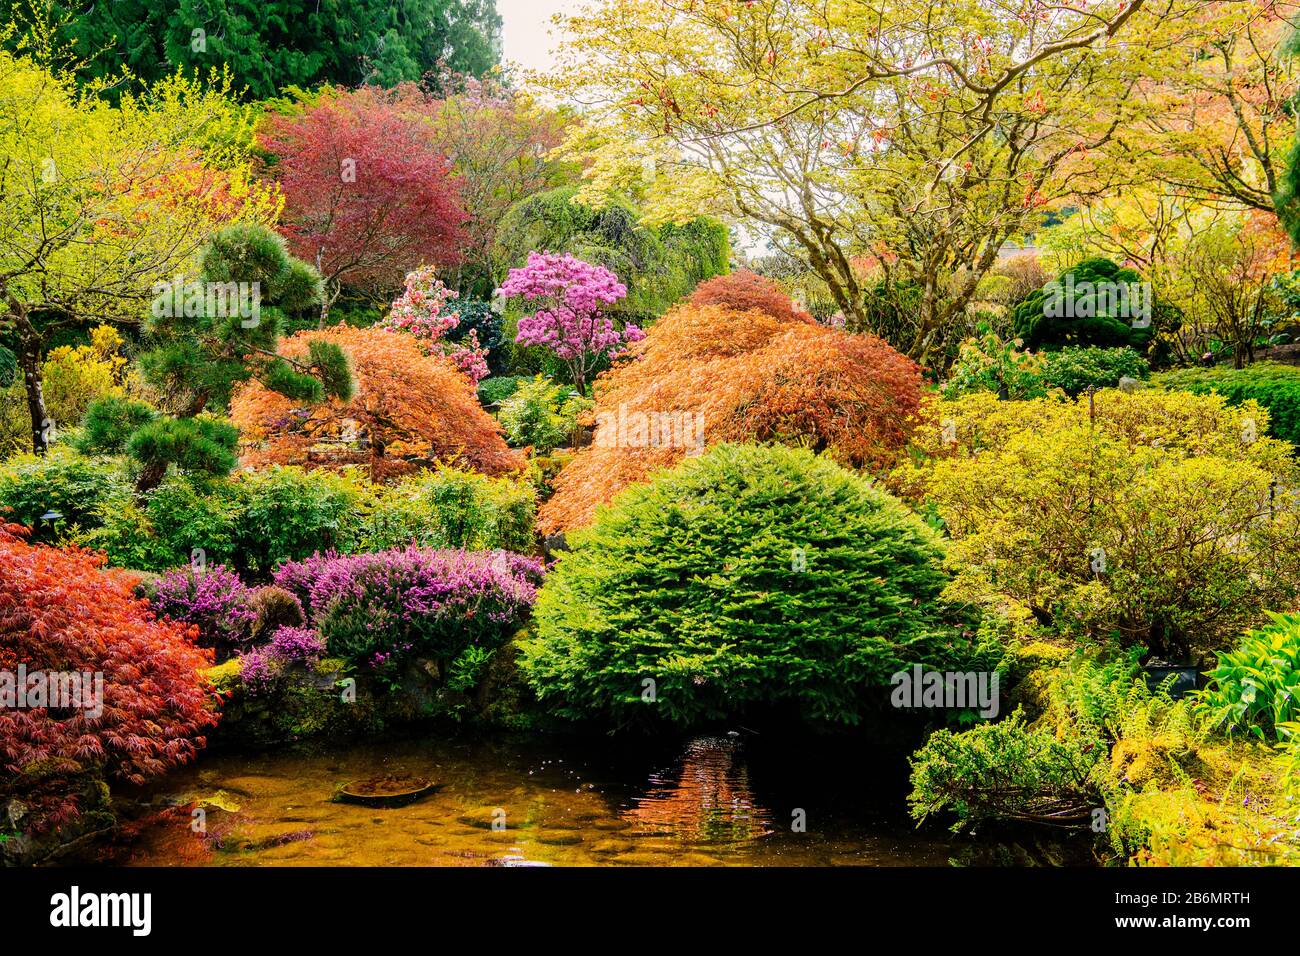 Landscape of Japanese style garden with bushes and pond, Butchart Gardens, Vancouver Island, British Columbia, Canada Stock Photo